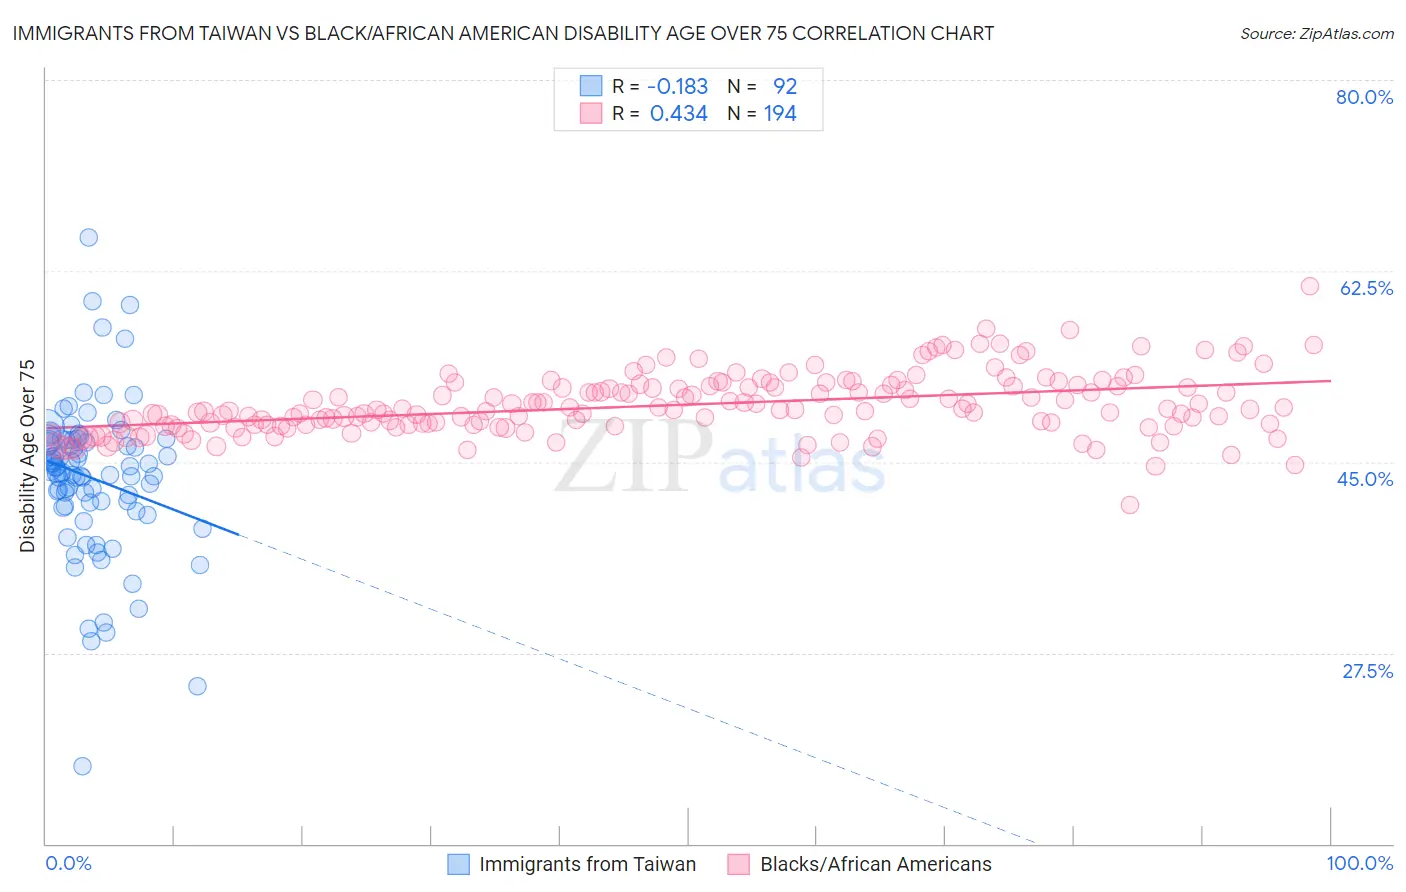 Immigrants from Taiwan vs Black/African American Disability Age Over 75